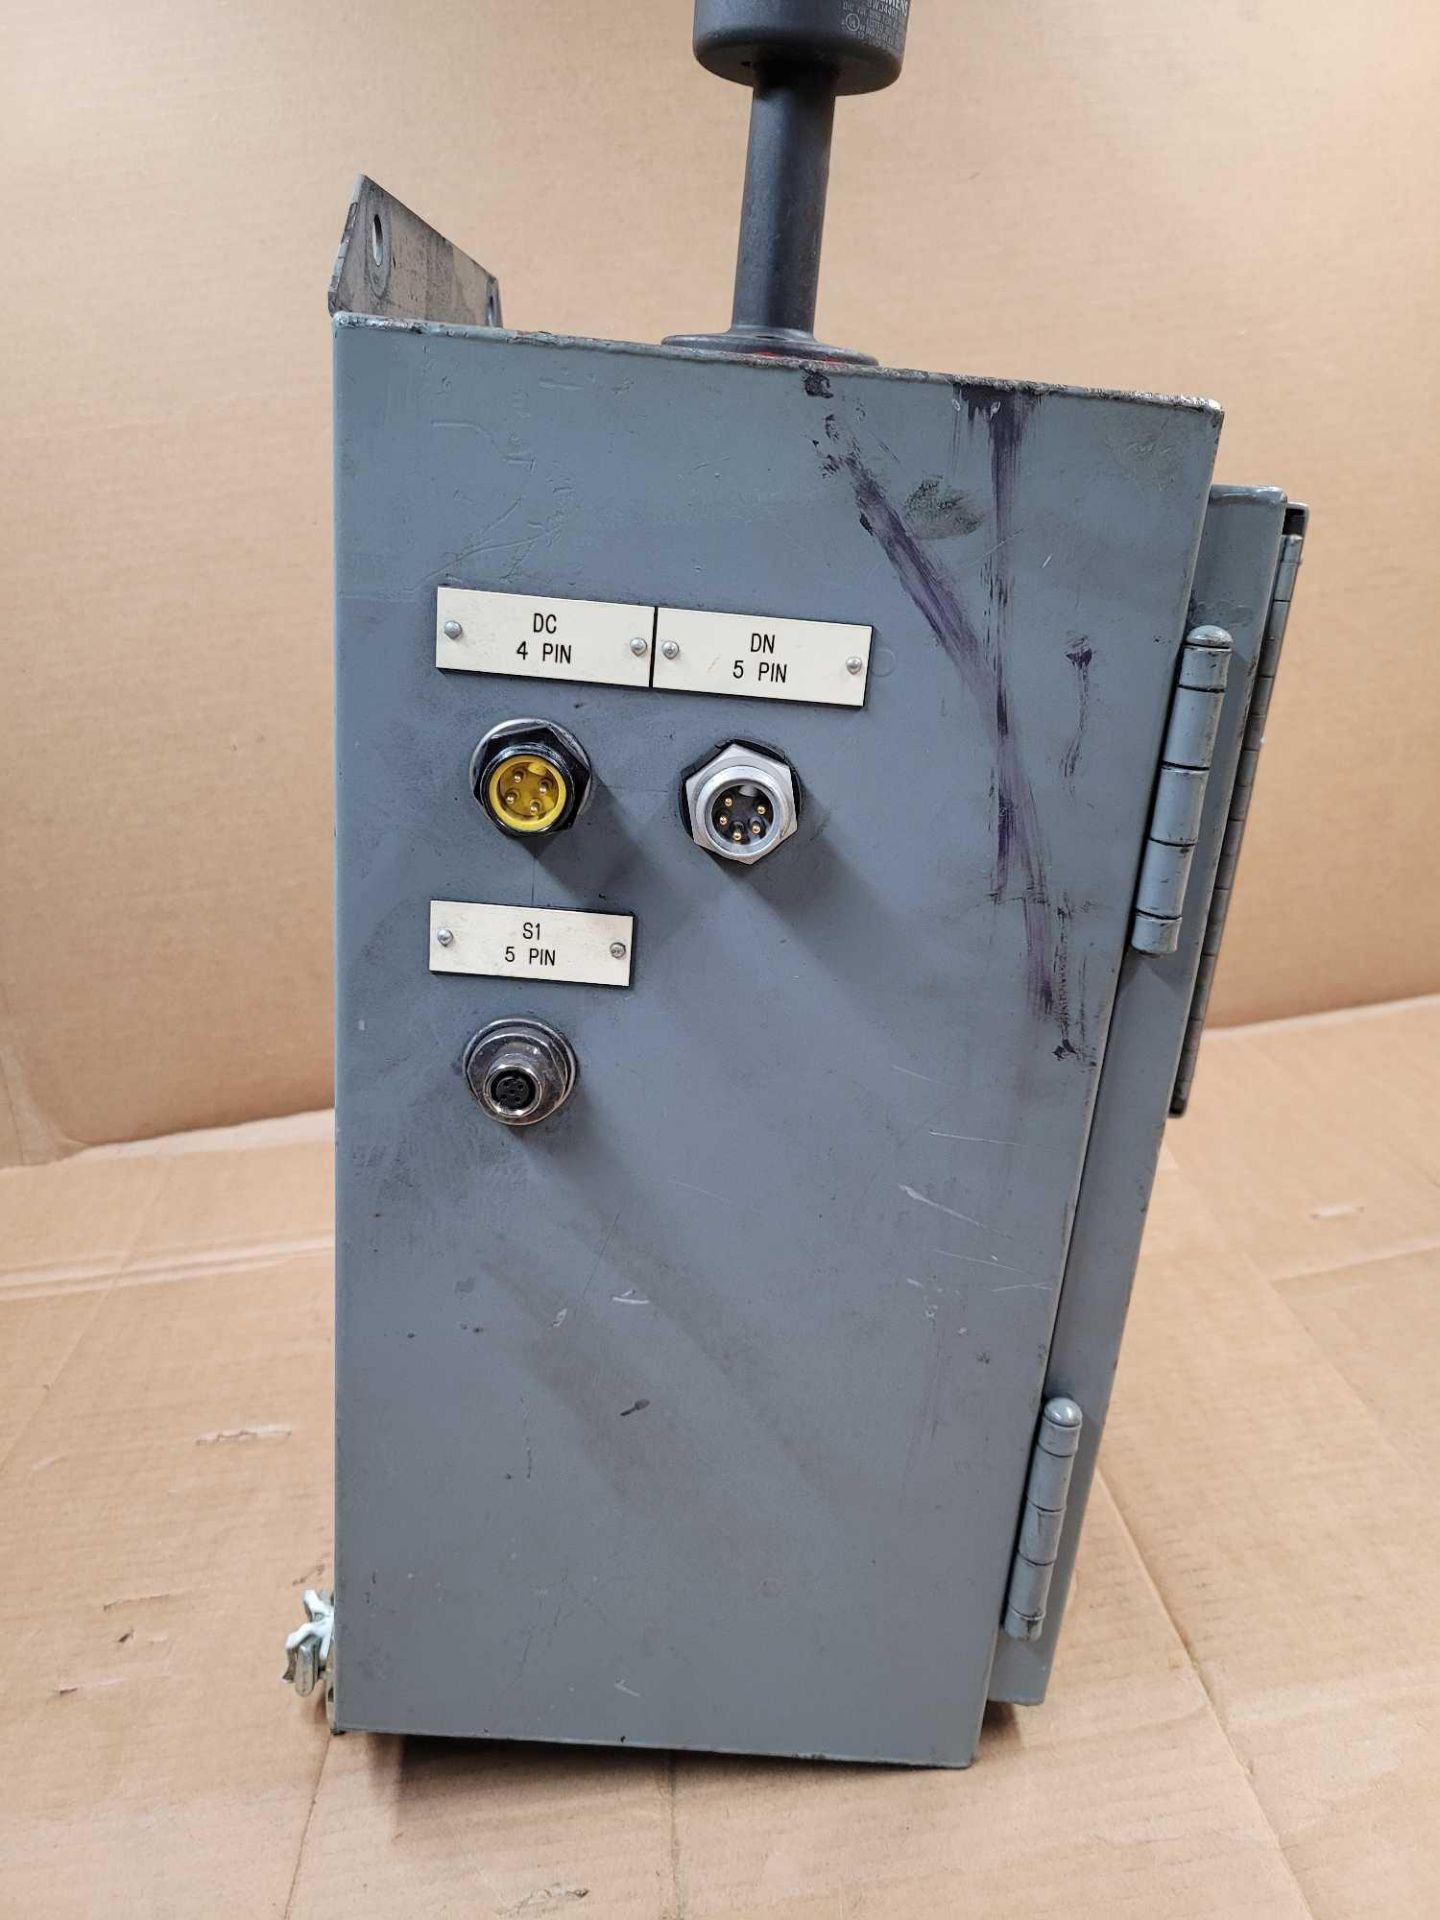 X-BAR AUTOMATION EC-4013RW / Reworked Entrance Gate Box  /  Lot Weight: 37.4 lbs - Image 10 of 13